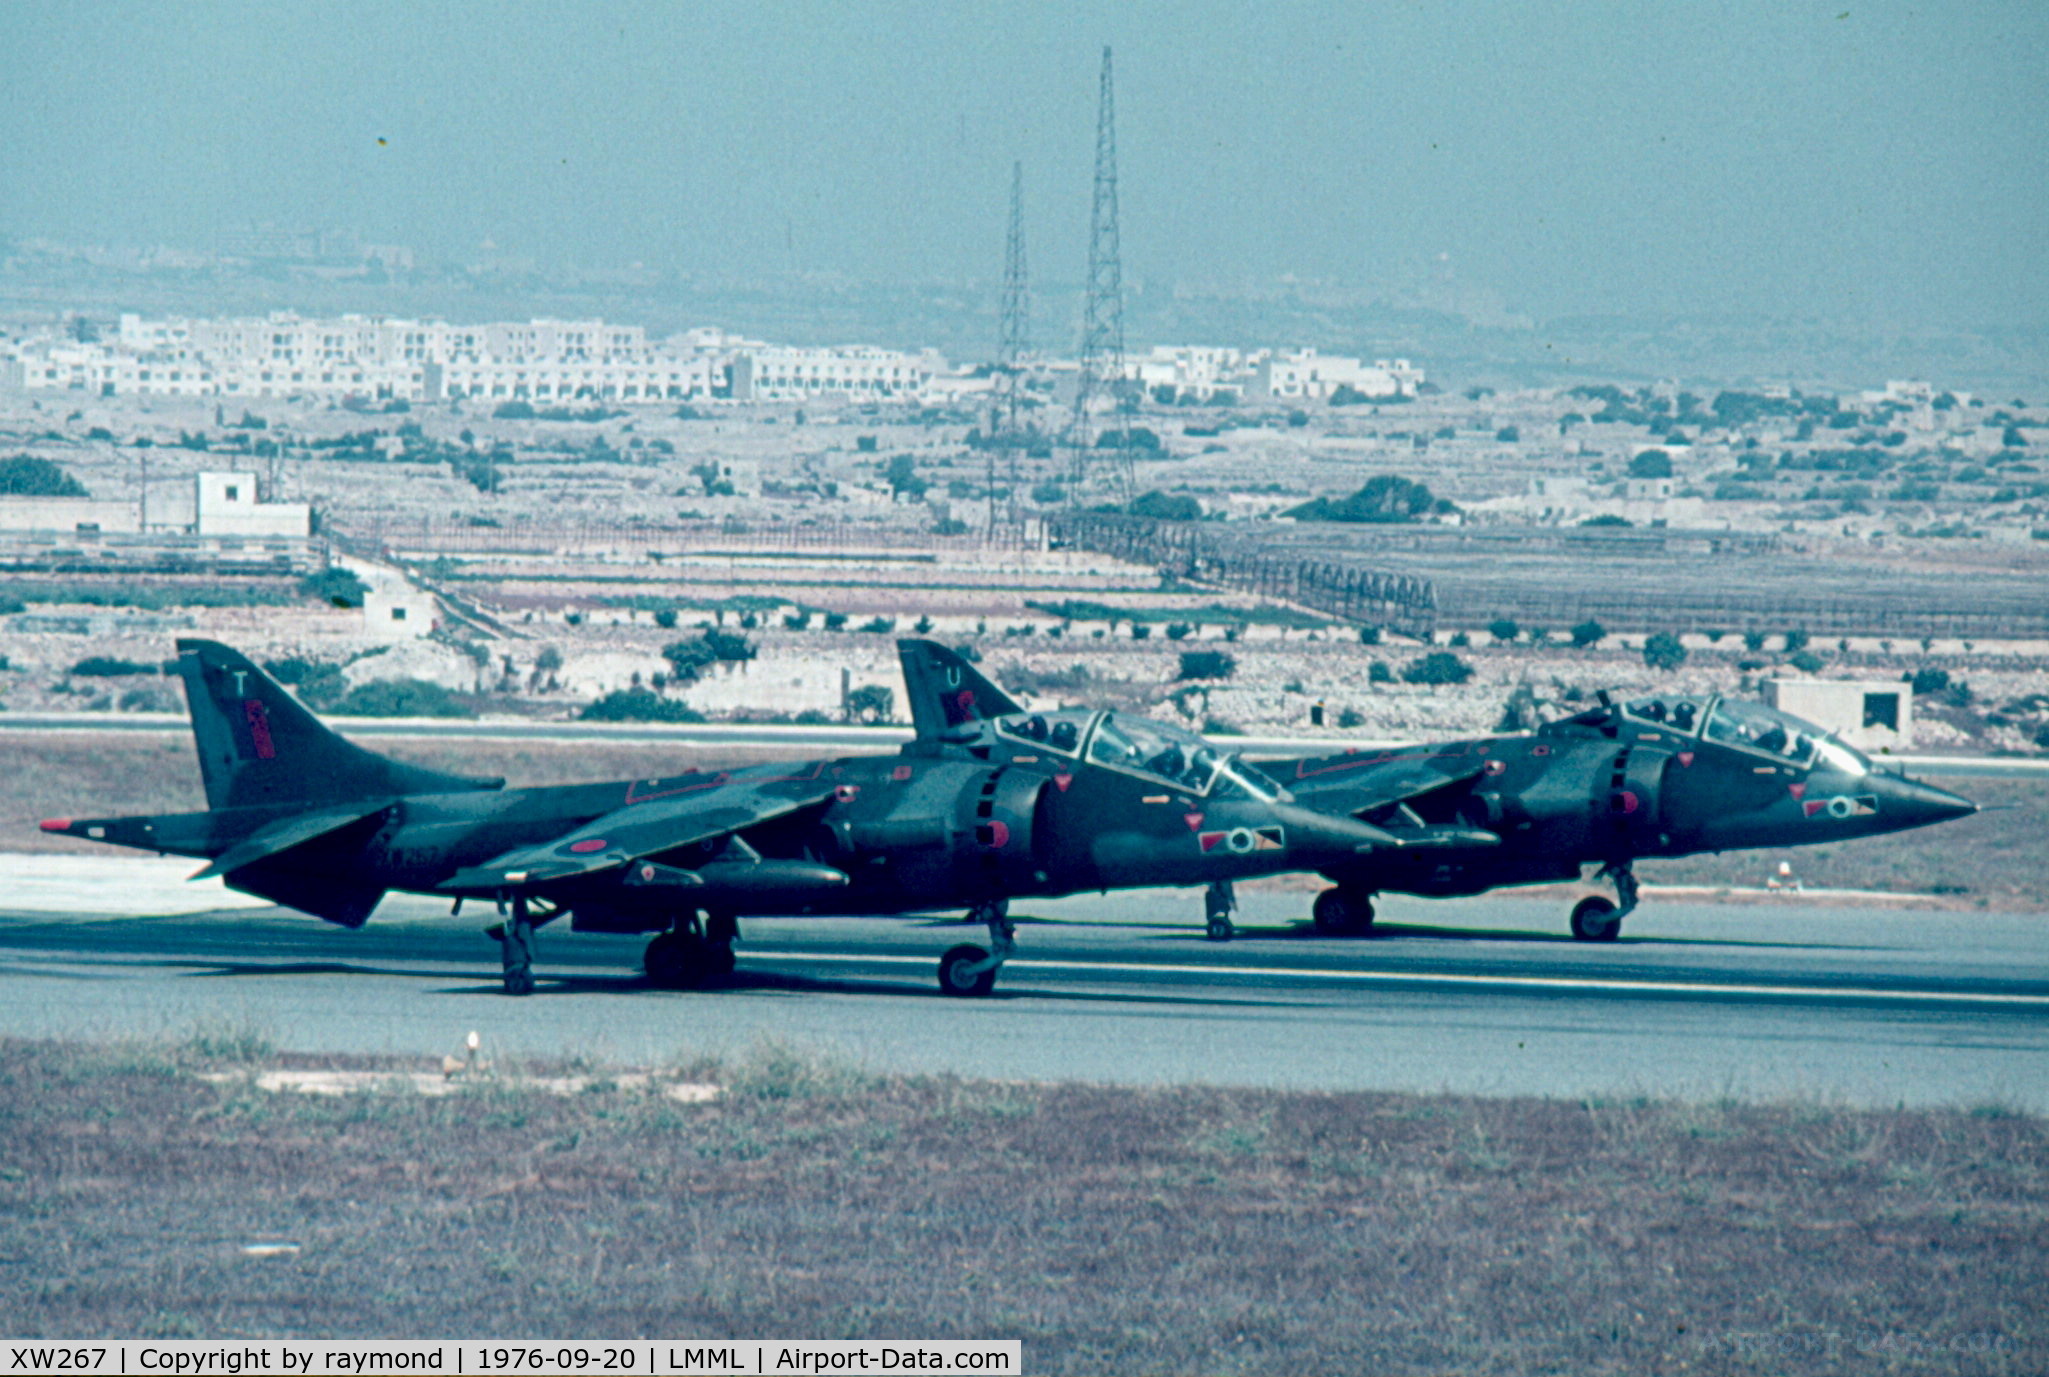 XW267, 1970 Hawker Siddeley Harrier T.4 C/N 212006, Harriers T4s XW267/T & XW268/U lining up the runway at RAF Luqa for a sortie.